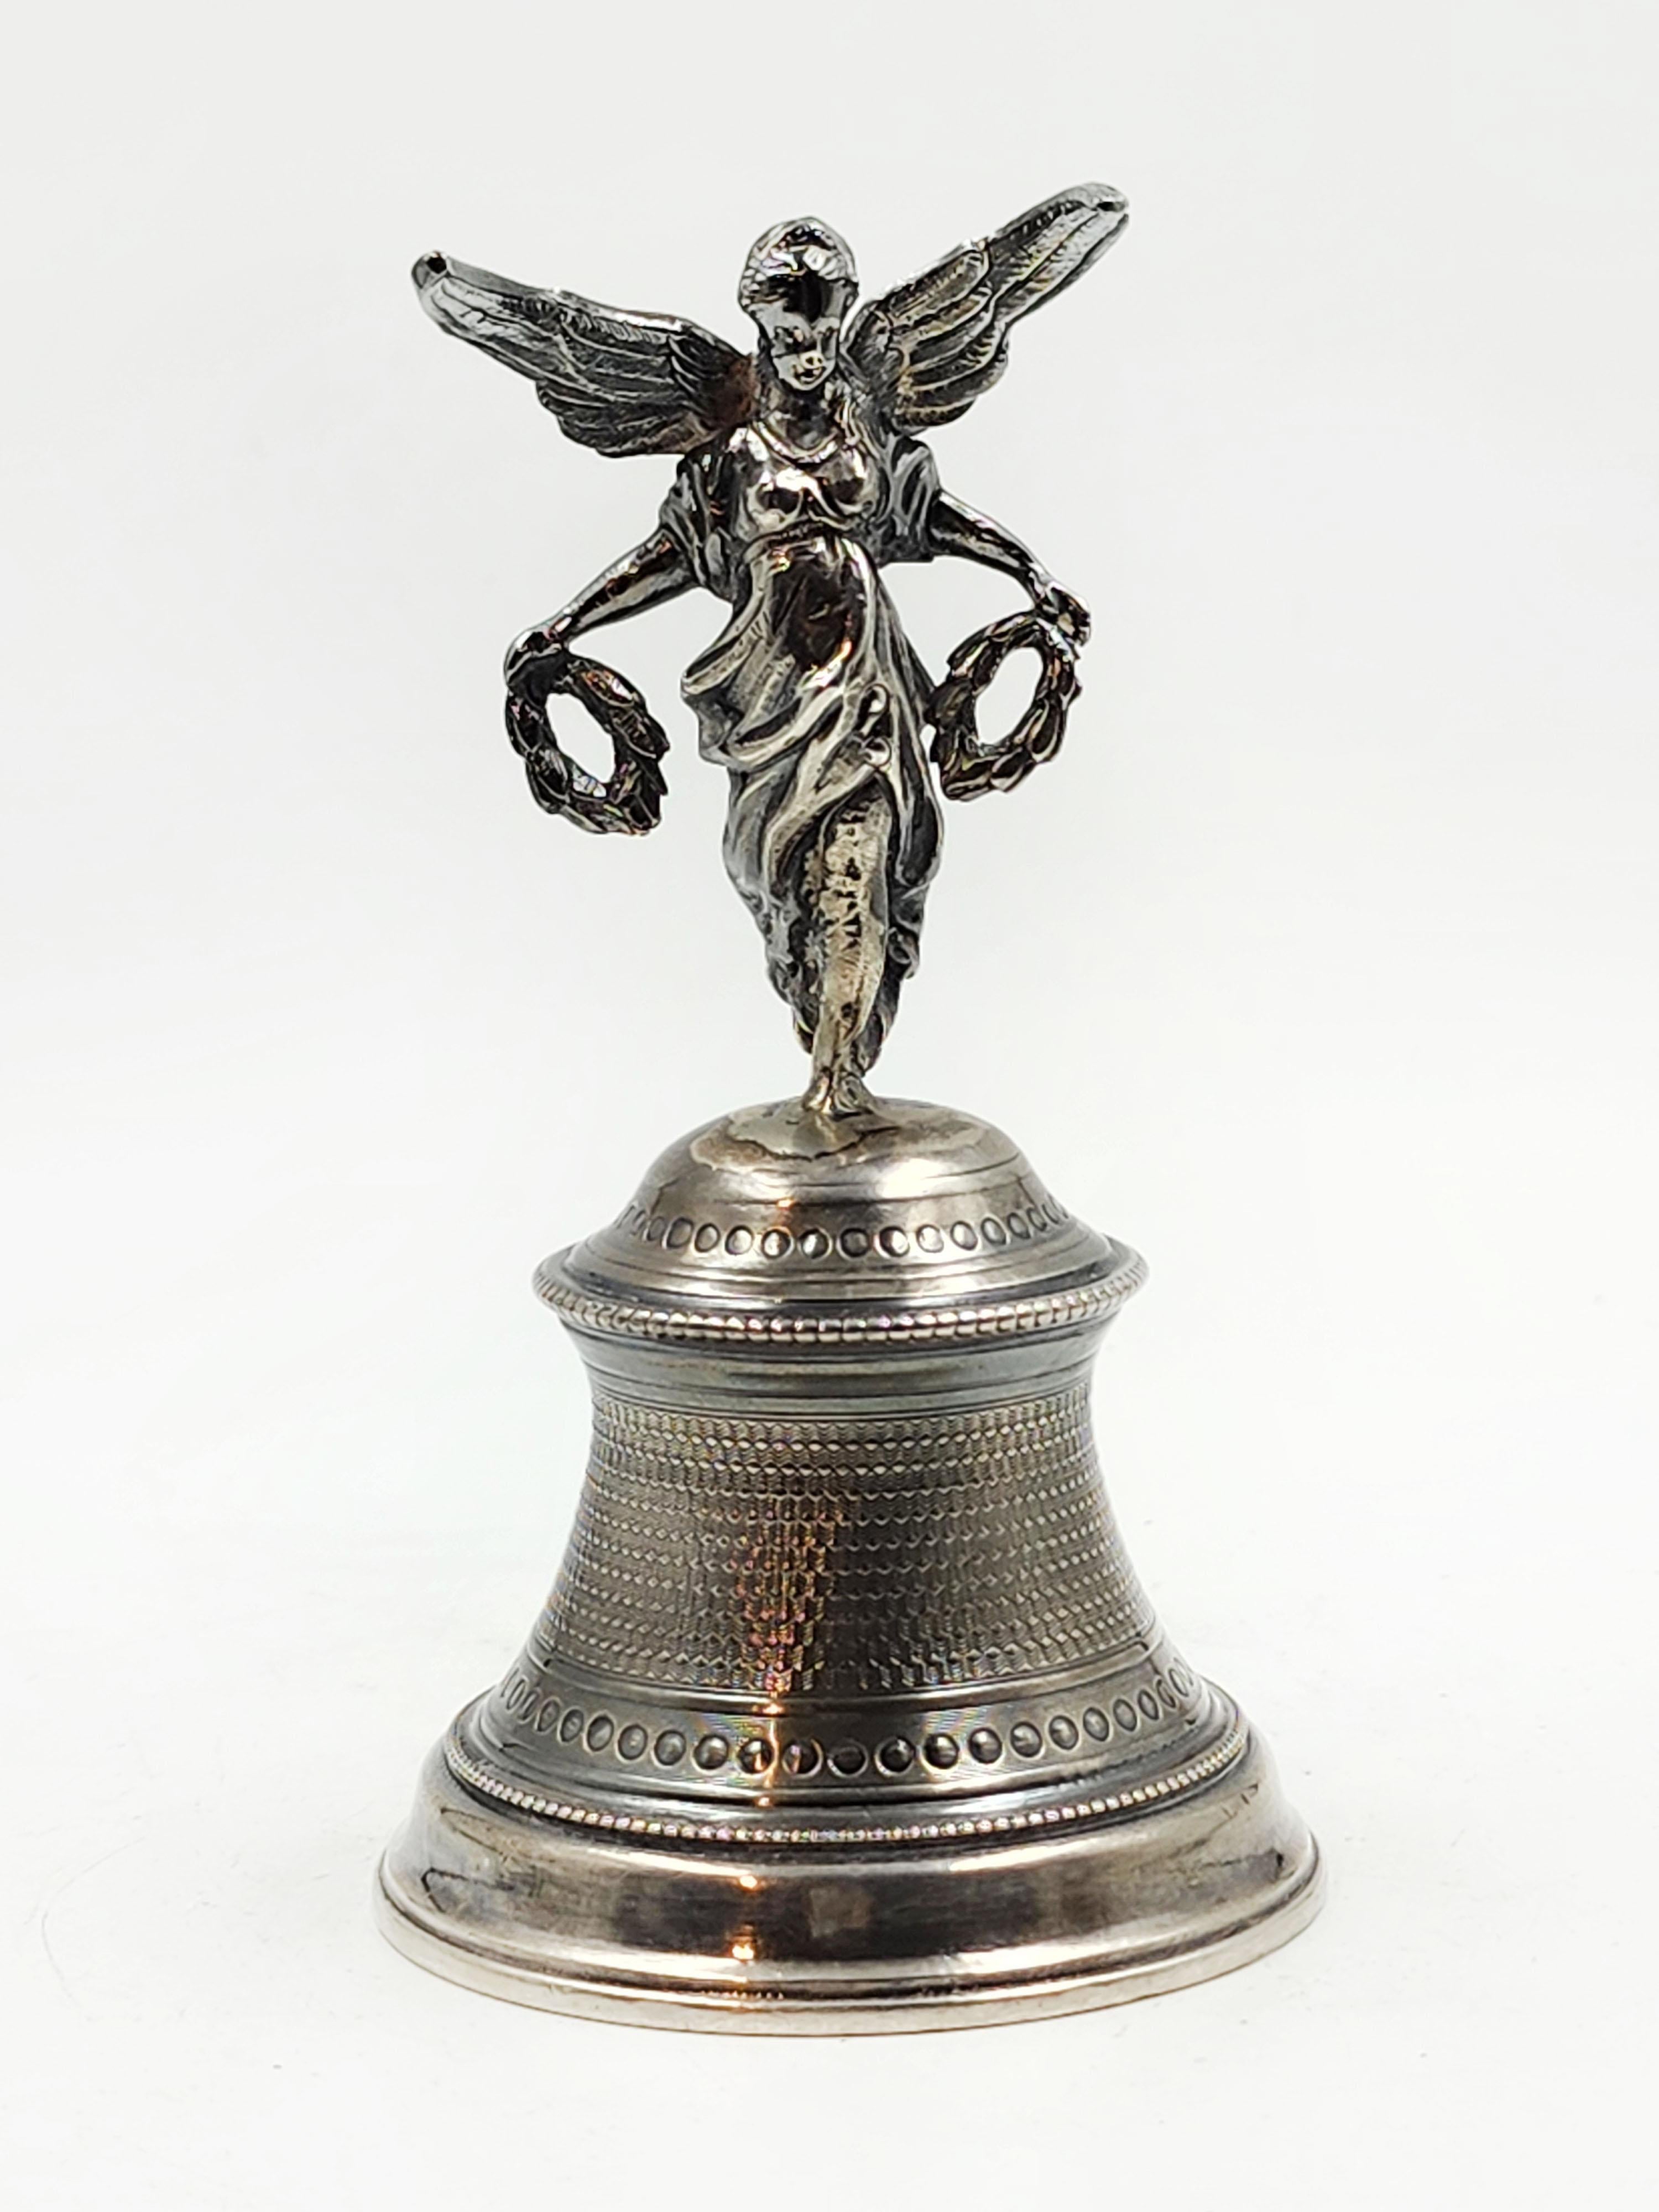 19th century sterling silver French bell
Beautiful sterling silver religious bell with a representation of an angel with open wings with laurel wreaths, and the bell itself has an intricate design.
Measures:
Height: 11.5 centimeters
Diameter: 6.5